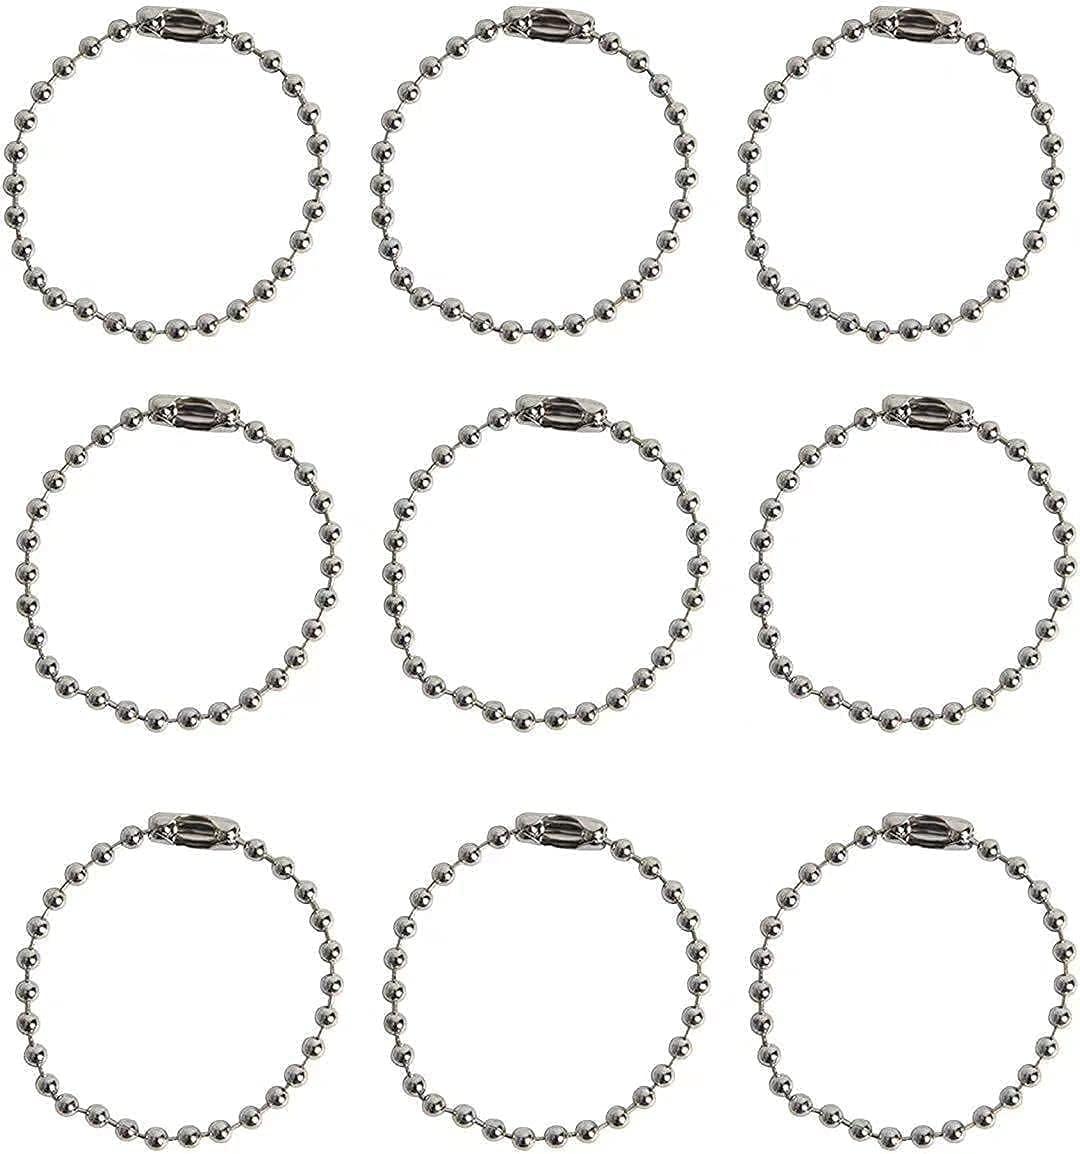 VIUJUH 150 pcs 100mm 4 Bead Chain,2.4mm Diameter with Ball Connector Clasp  Keychain Rings Metal Bead Chain Nickel Chain Dog Tag Chain (Silver)